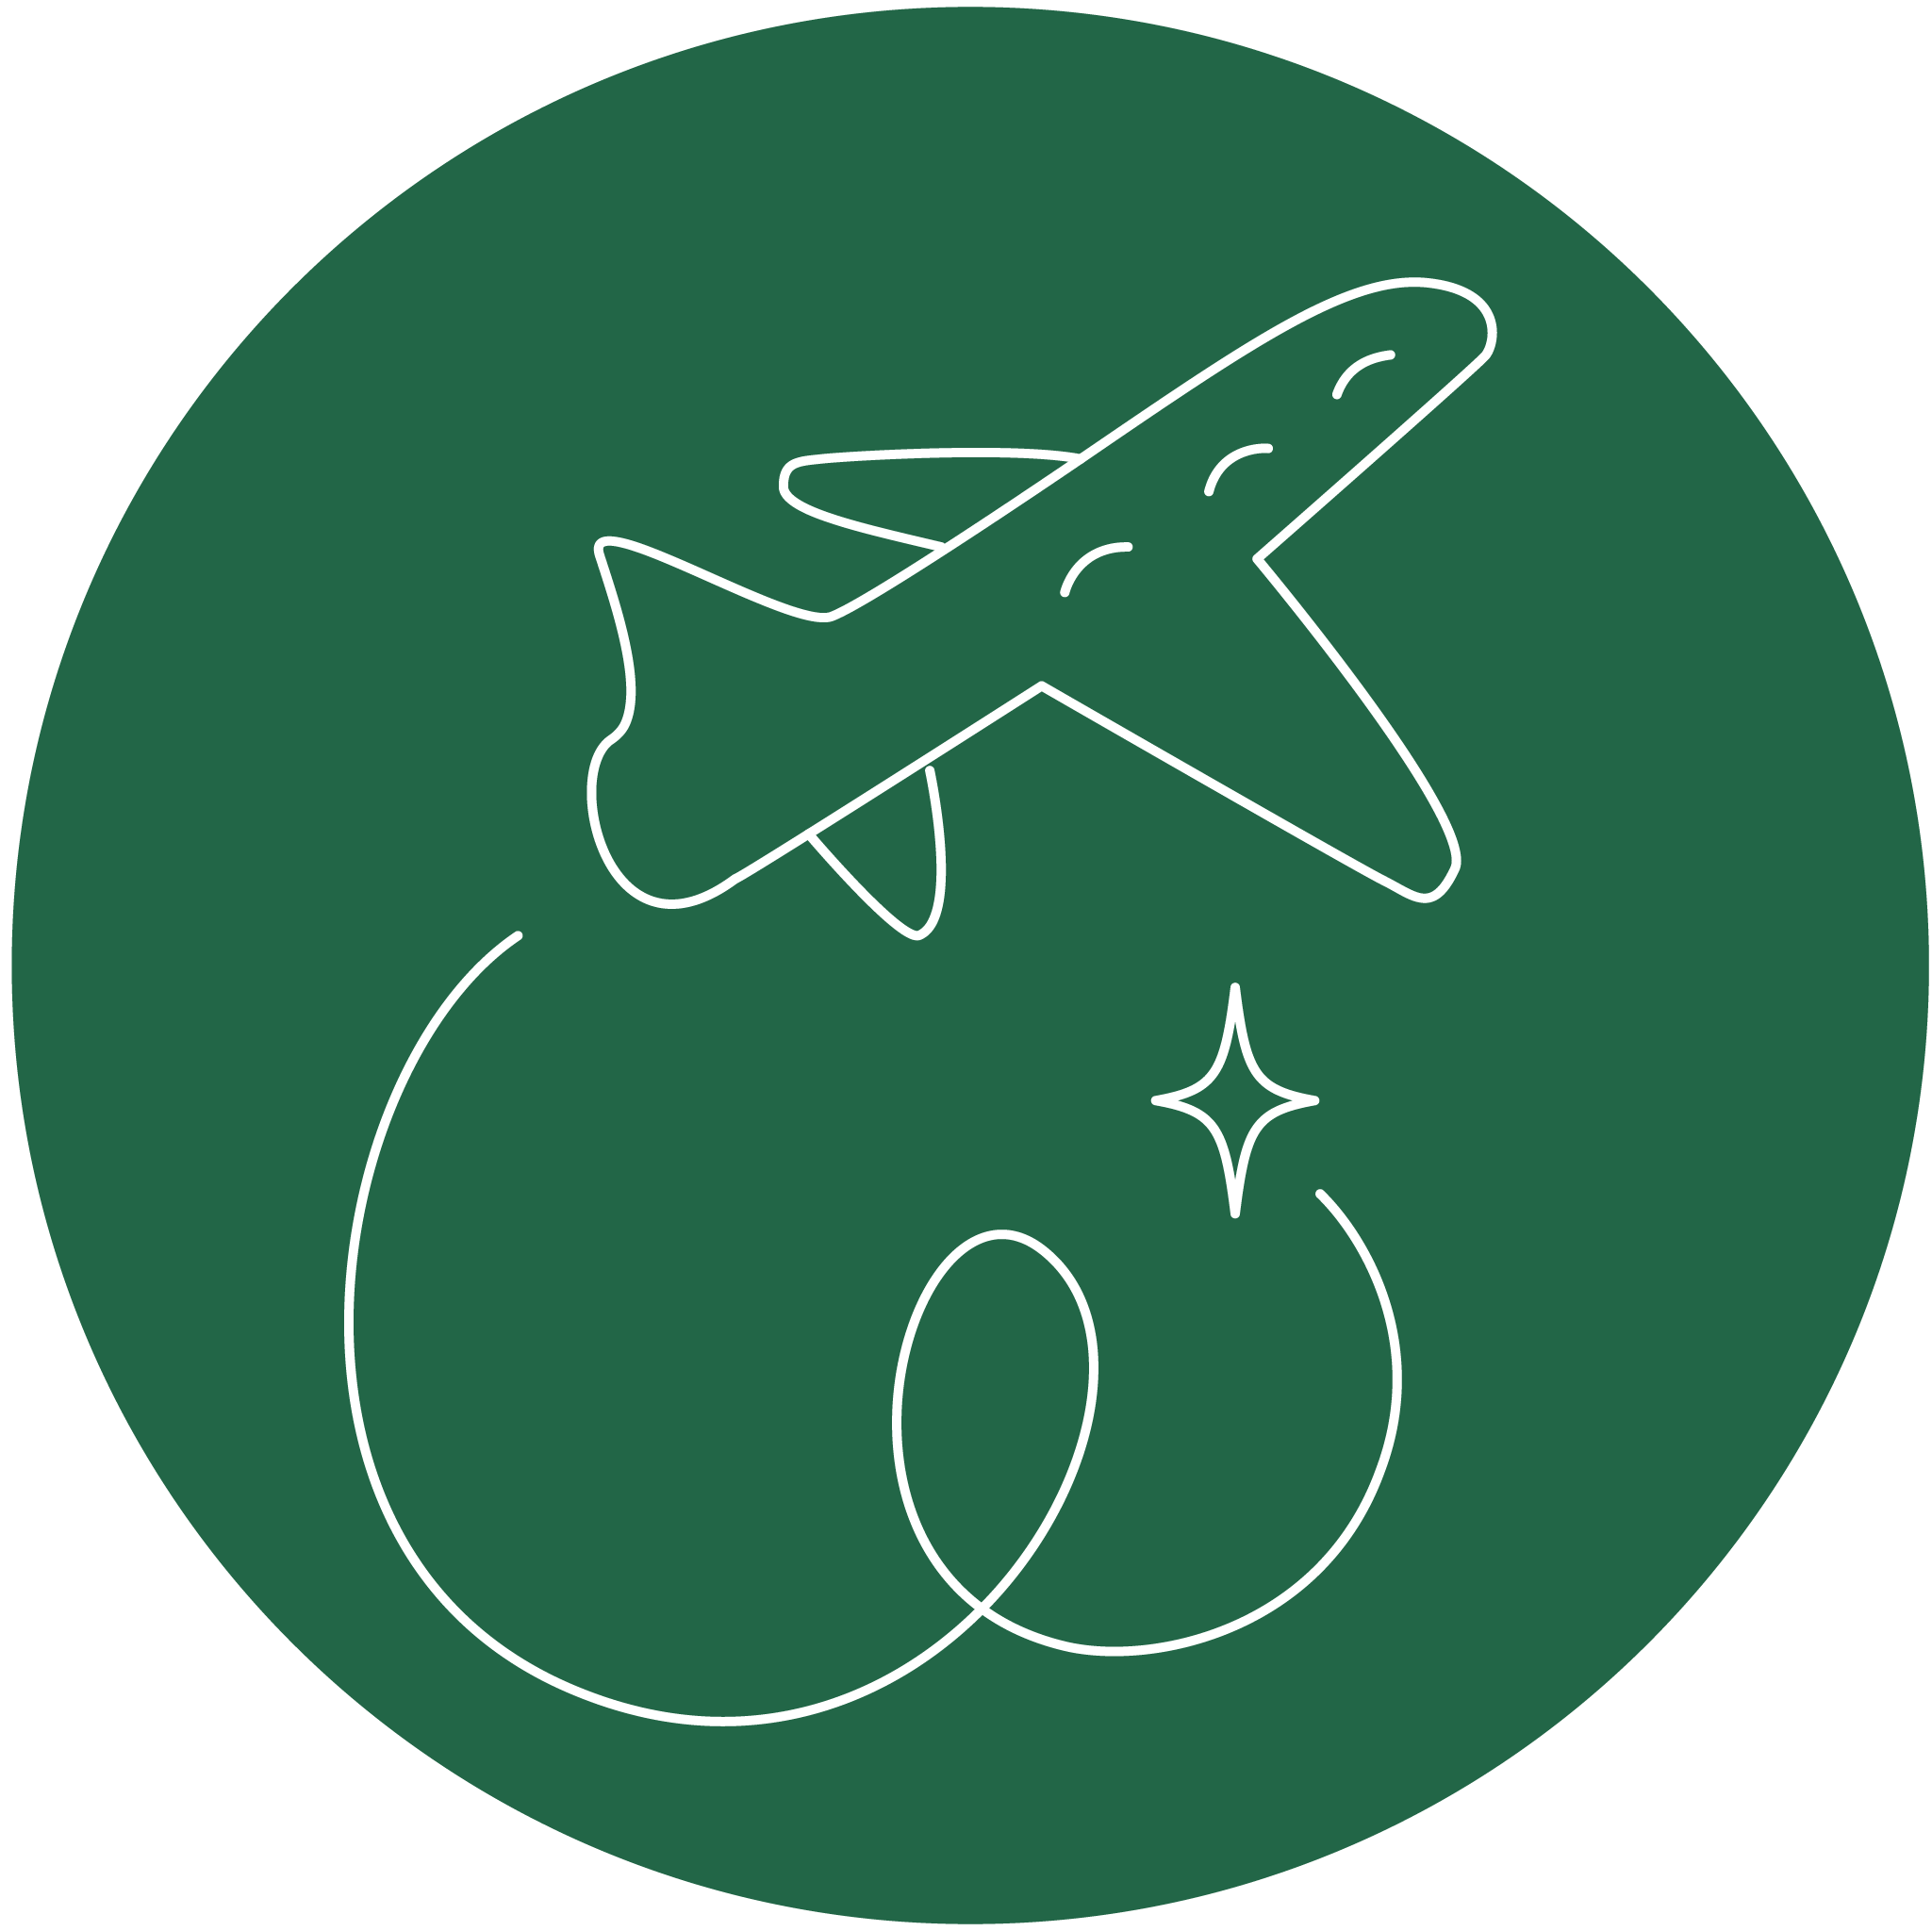 Icon for travel. A plane with trail and a star on a green background. Mostly works as decoration on about me page.